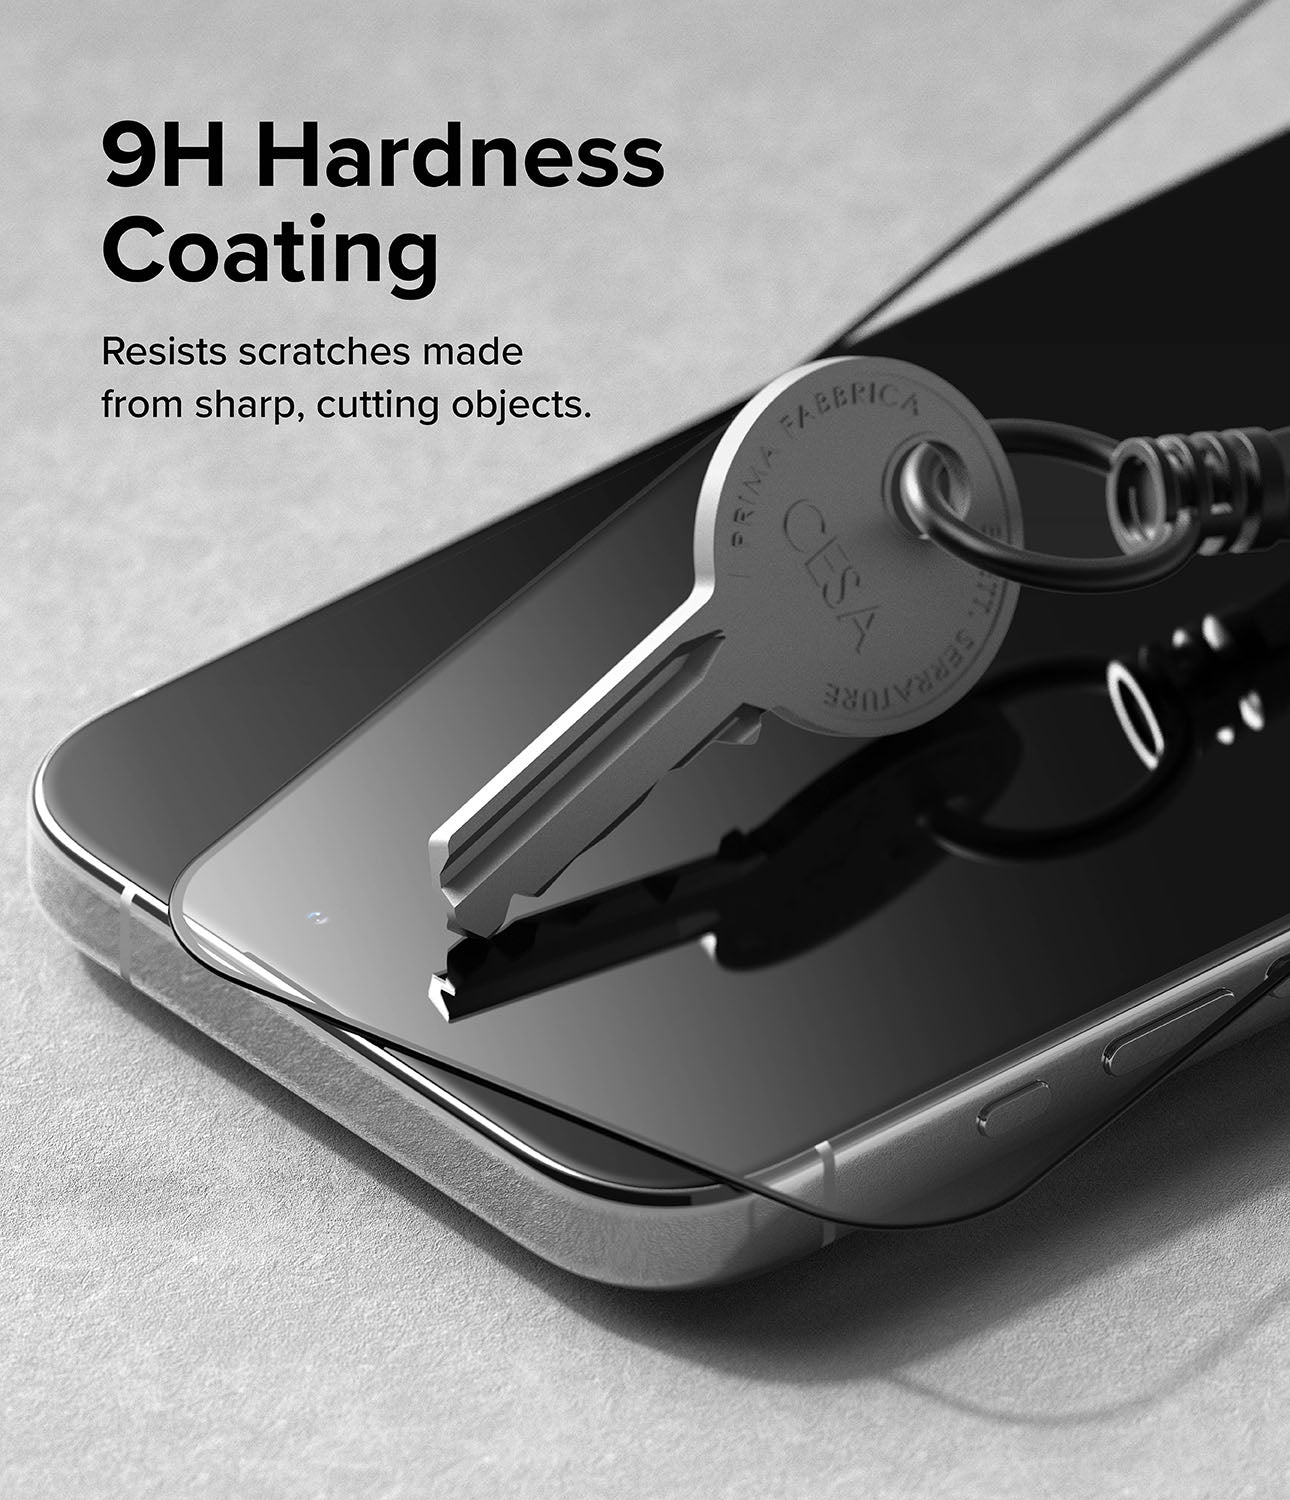 iPhone 15 Pro Screen Protector | Full Cover Glass- 9H Hardness Coating. Resists scratches made from sharp, cutting objects.